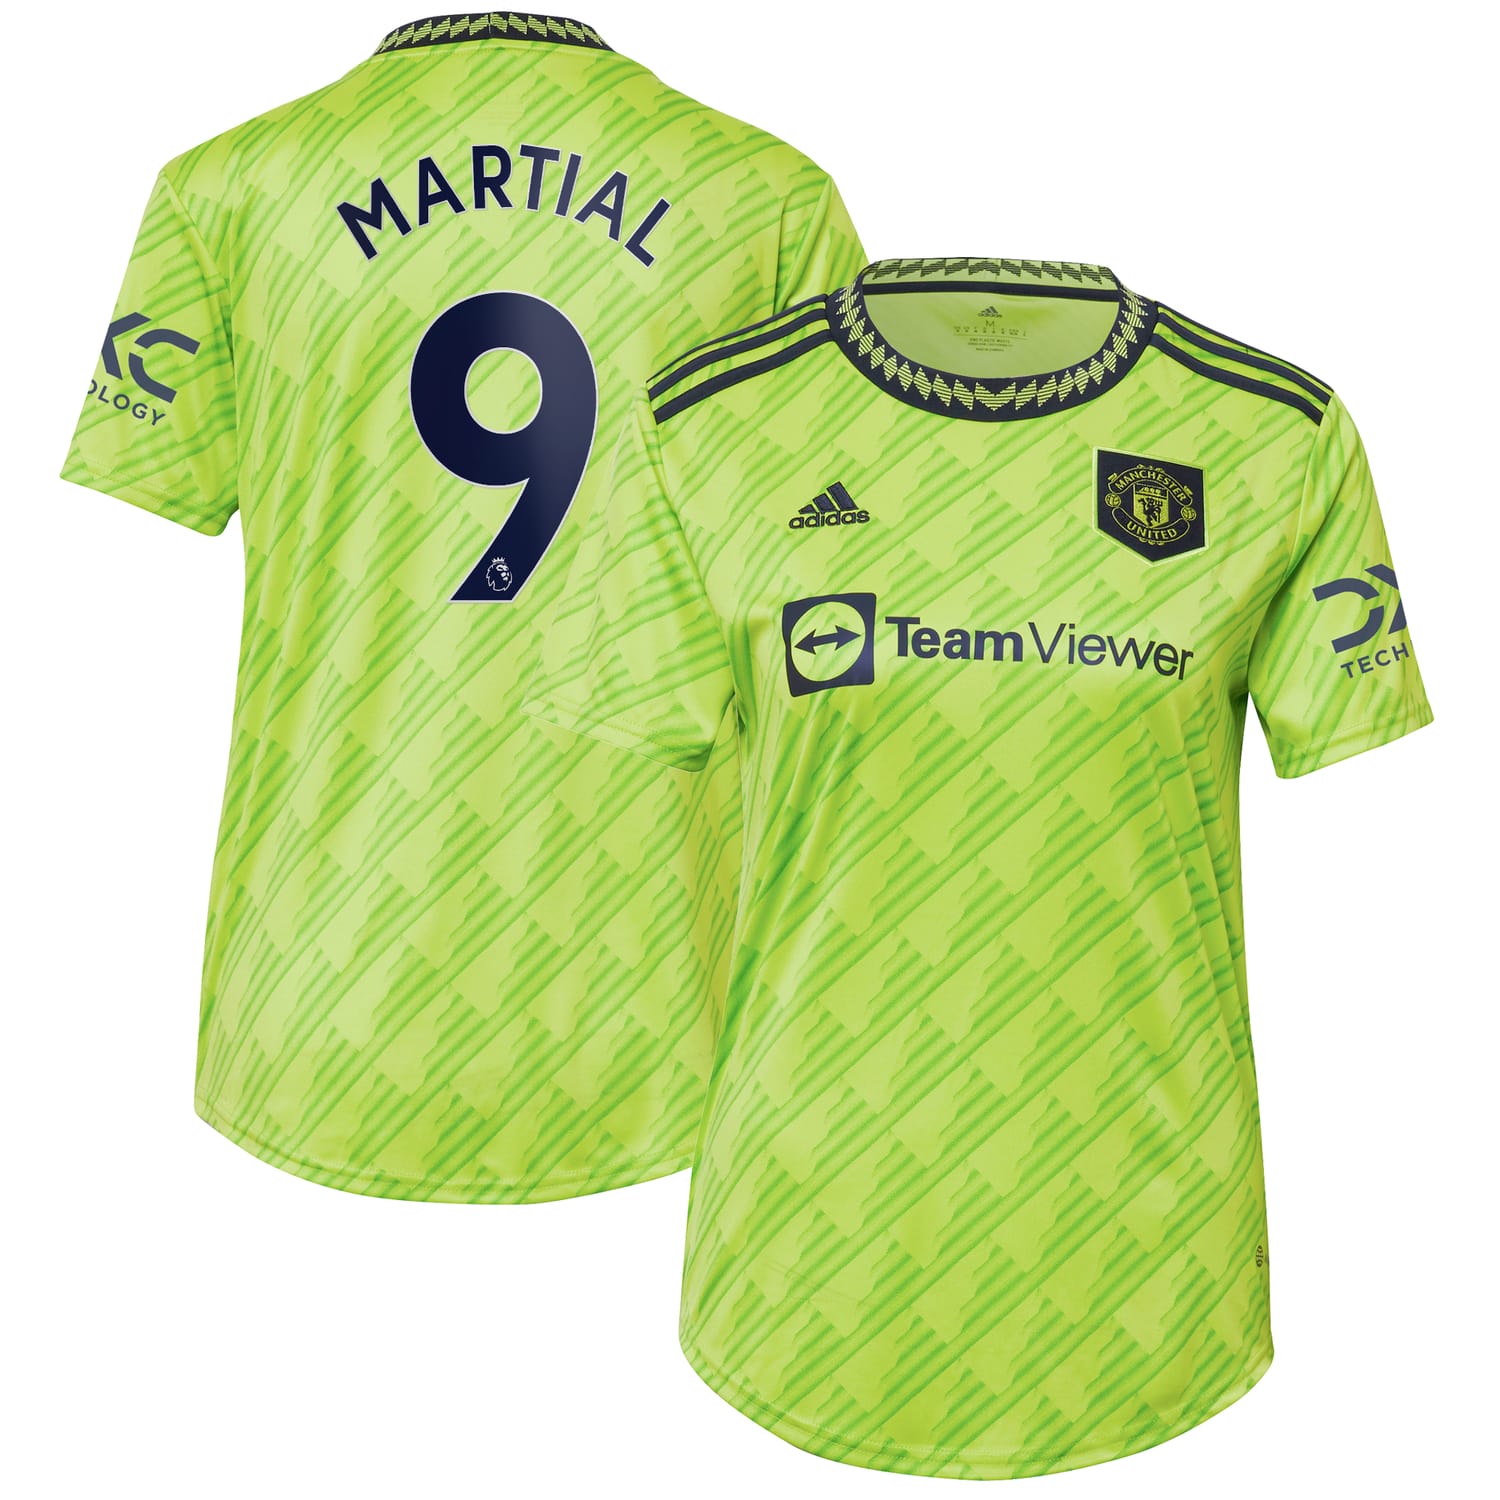 Premier League Manchester United Third Jersey Shirt 2022-23 player Anthony Martial 9 printing for Women